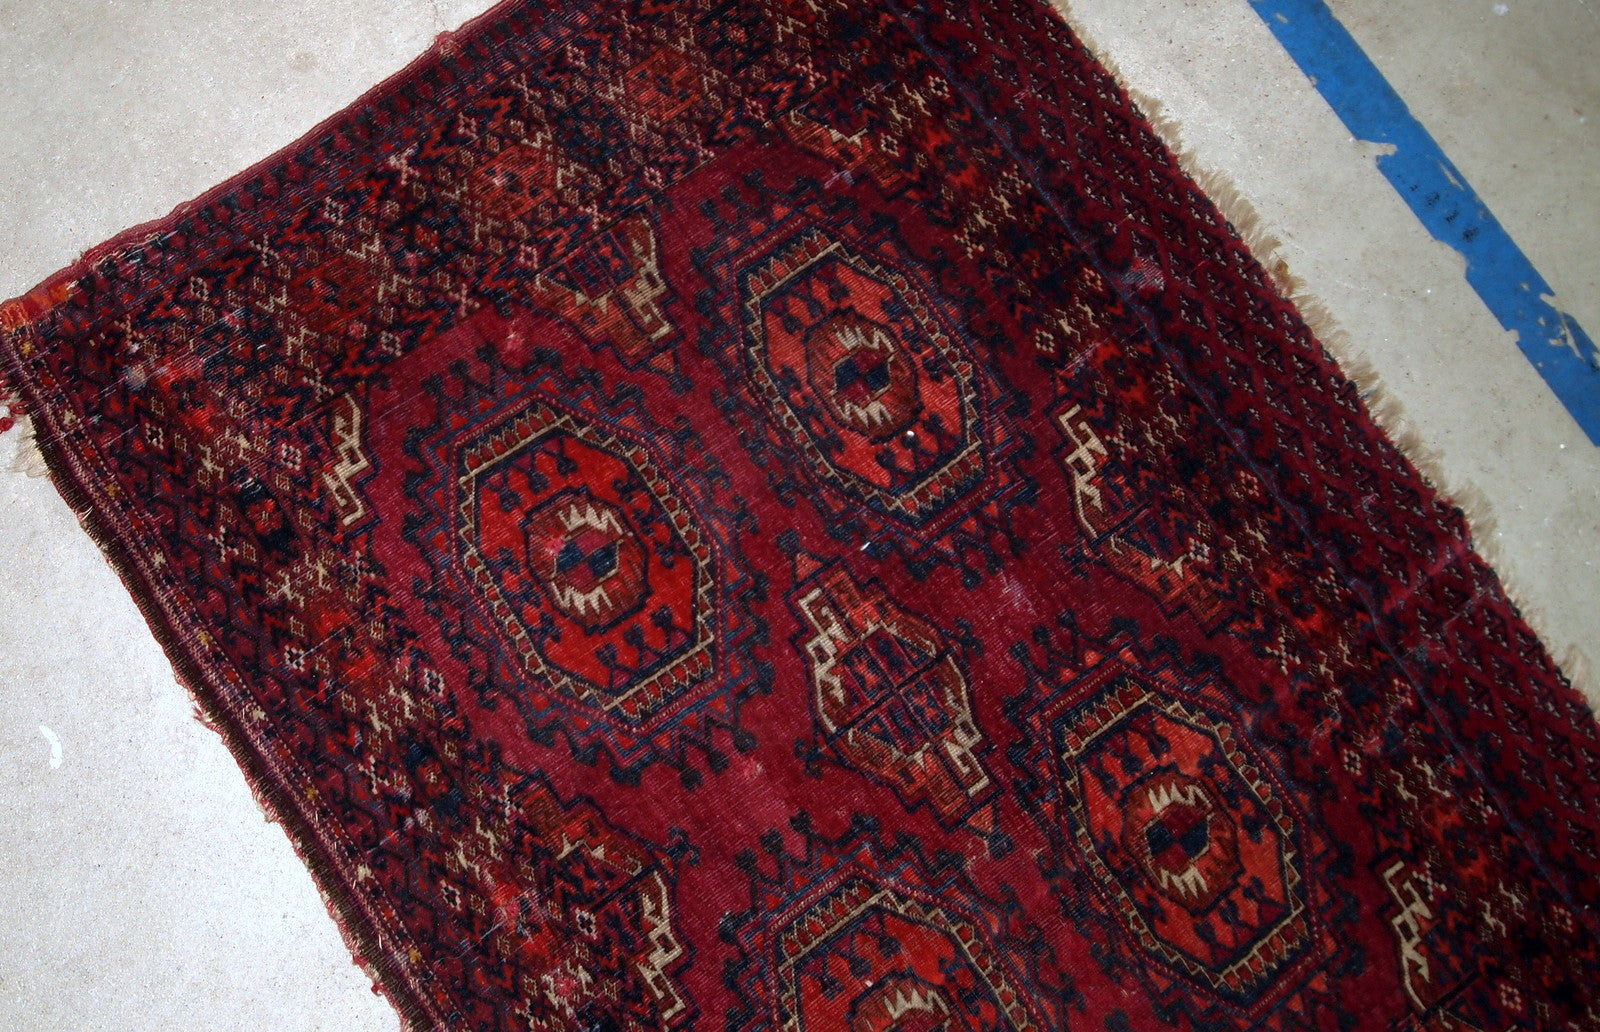 Handmade antique collectible Turkmen Saryk rug in scarlet shade. The rug is from the end of 19th century in original condition, it has some low pile and age wear.